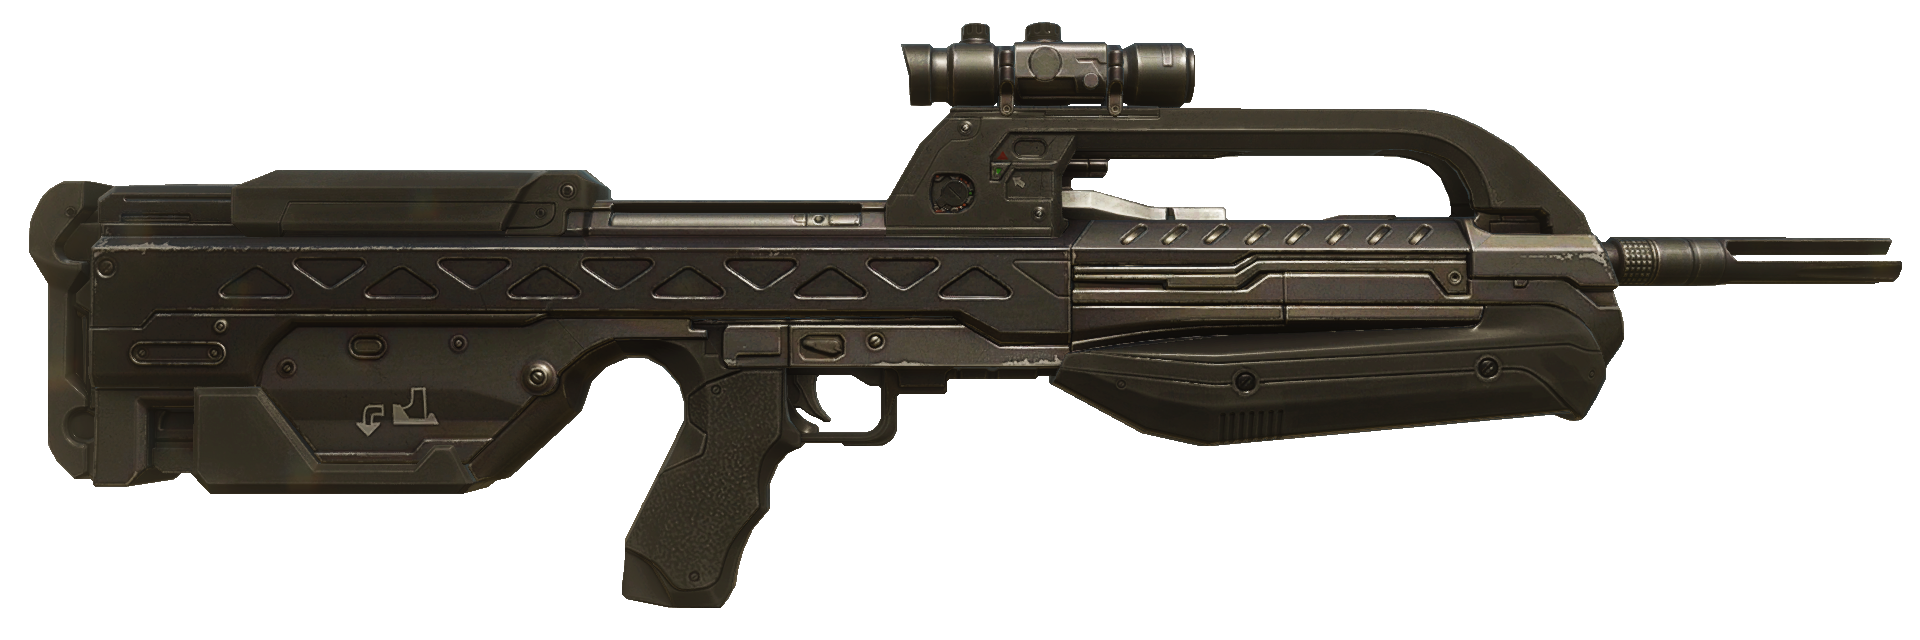 H5G_Render_BR55_Service_Rifle.png